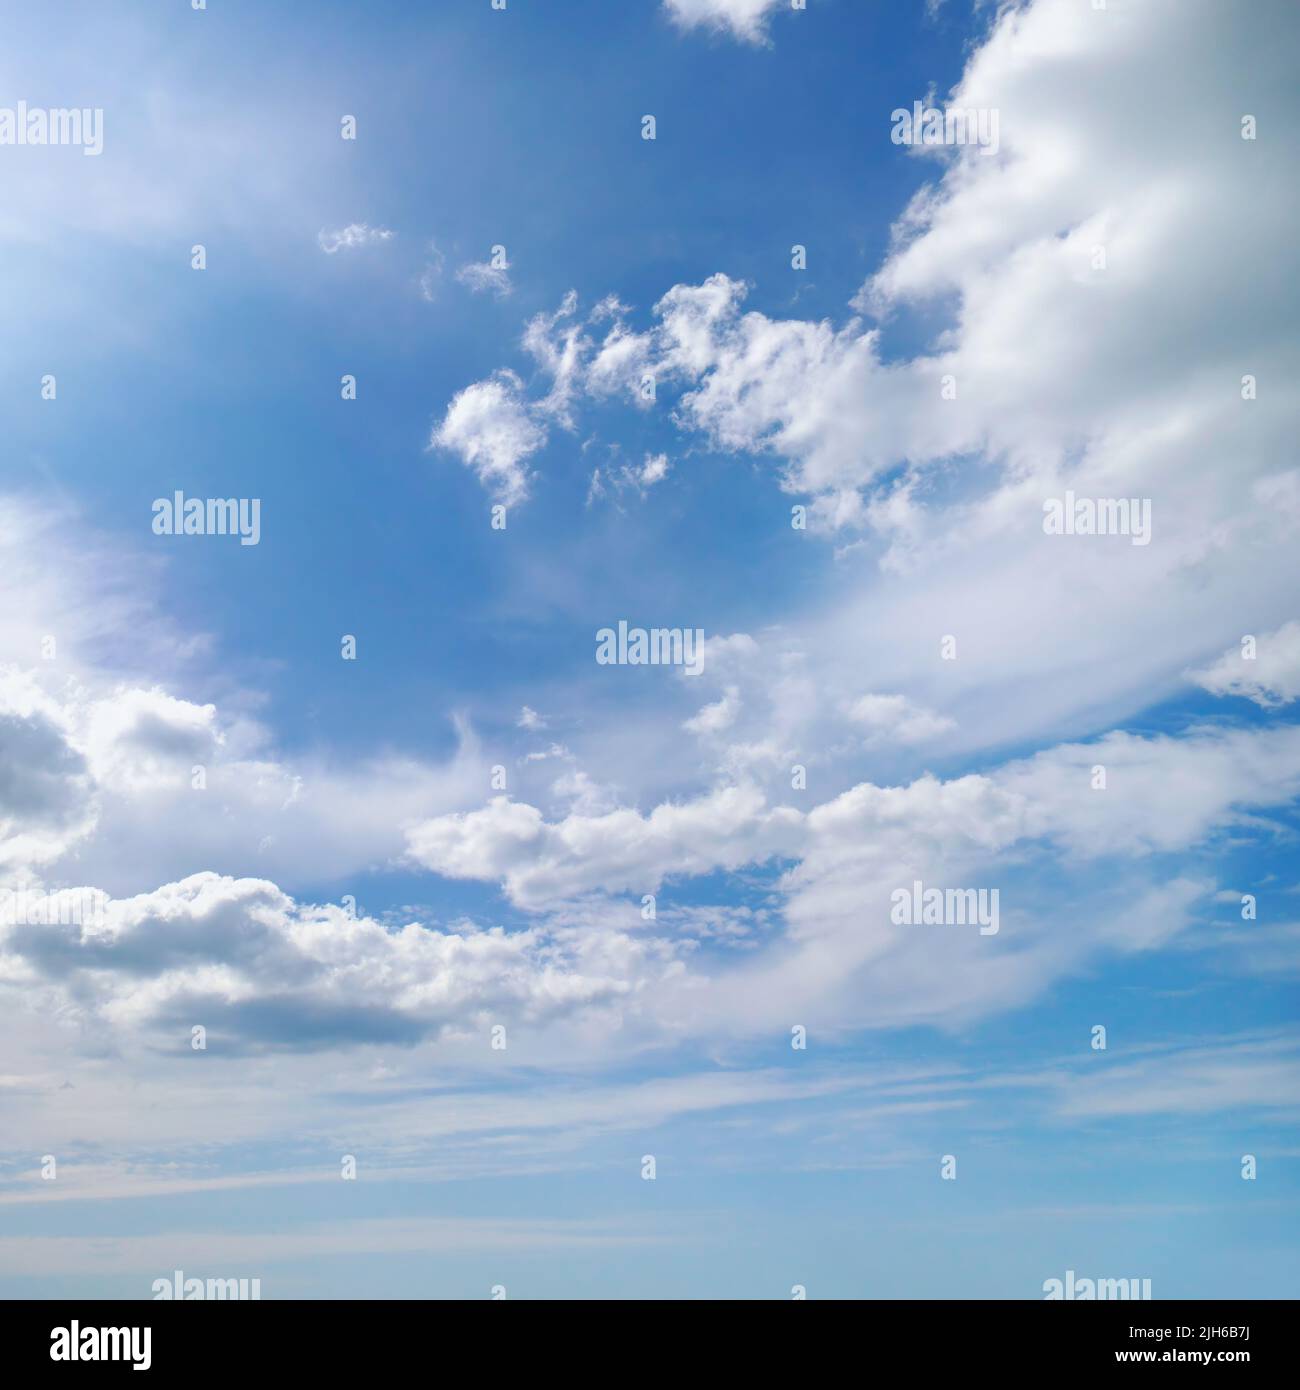 Bright summer sun on blue sky with white clouds. Stock Photo